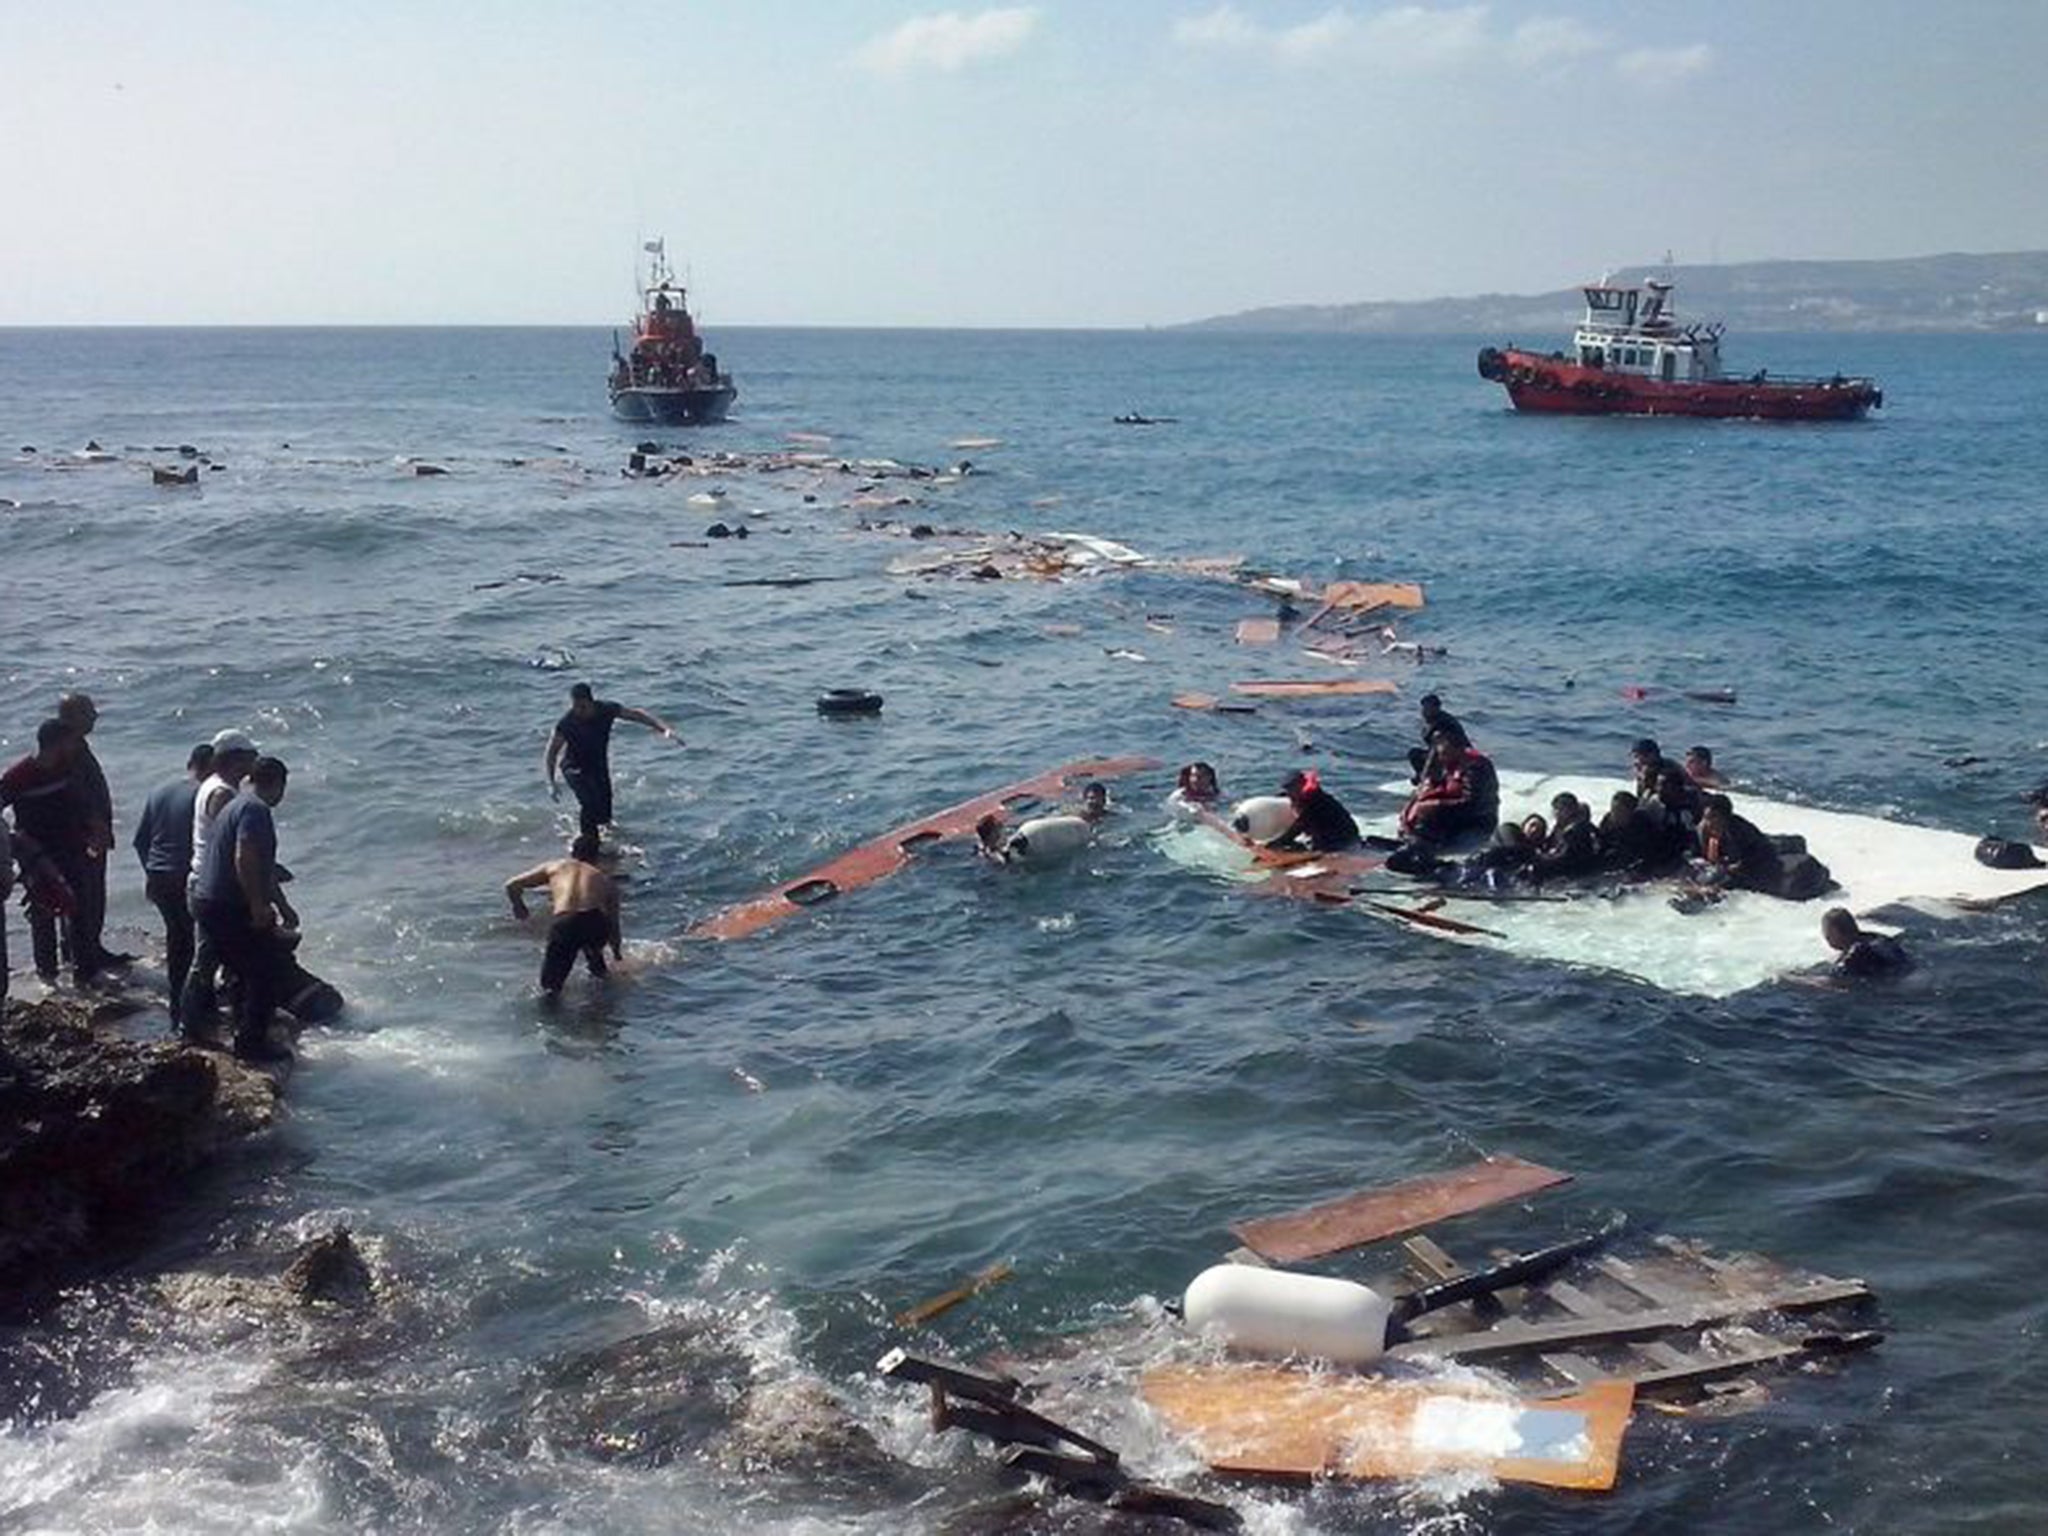 Survivors cling on to debris after the boat they were in ran aground at Zefyros beach in Rhodes on Monday